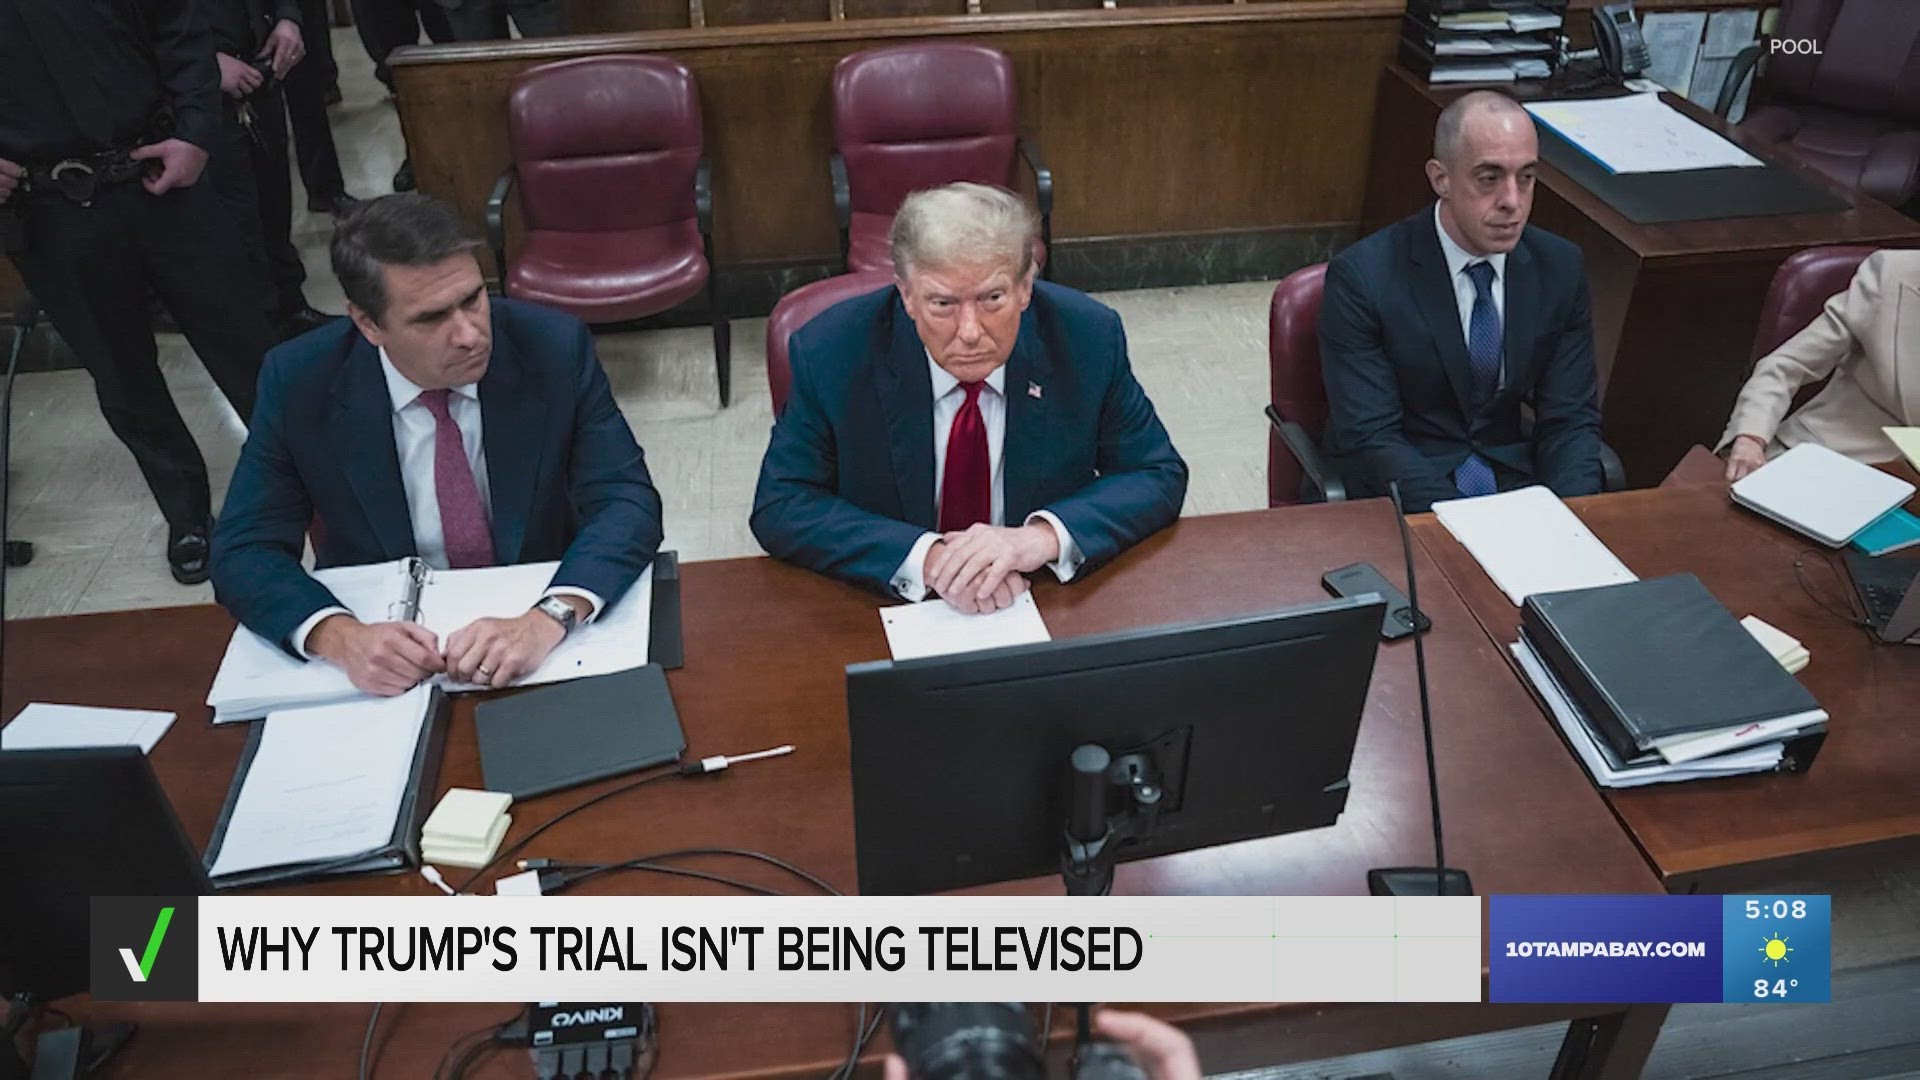 A jury of 12 people was seated Thursday in former President Donald Trump’s hush money trial in New York, and the court quickly turned to selecting alternate jurors.